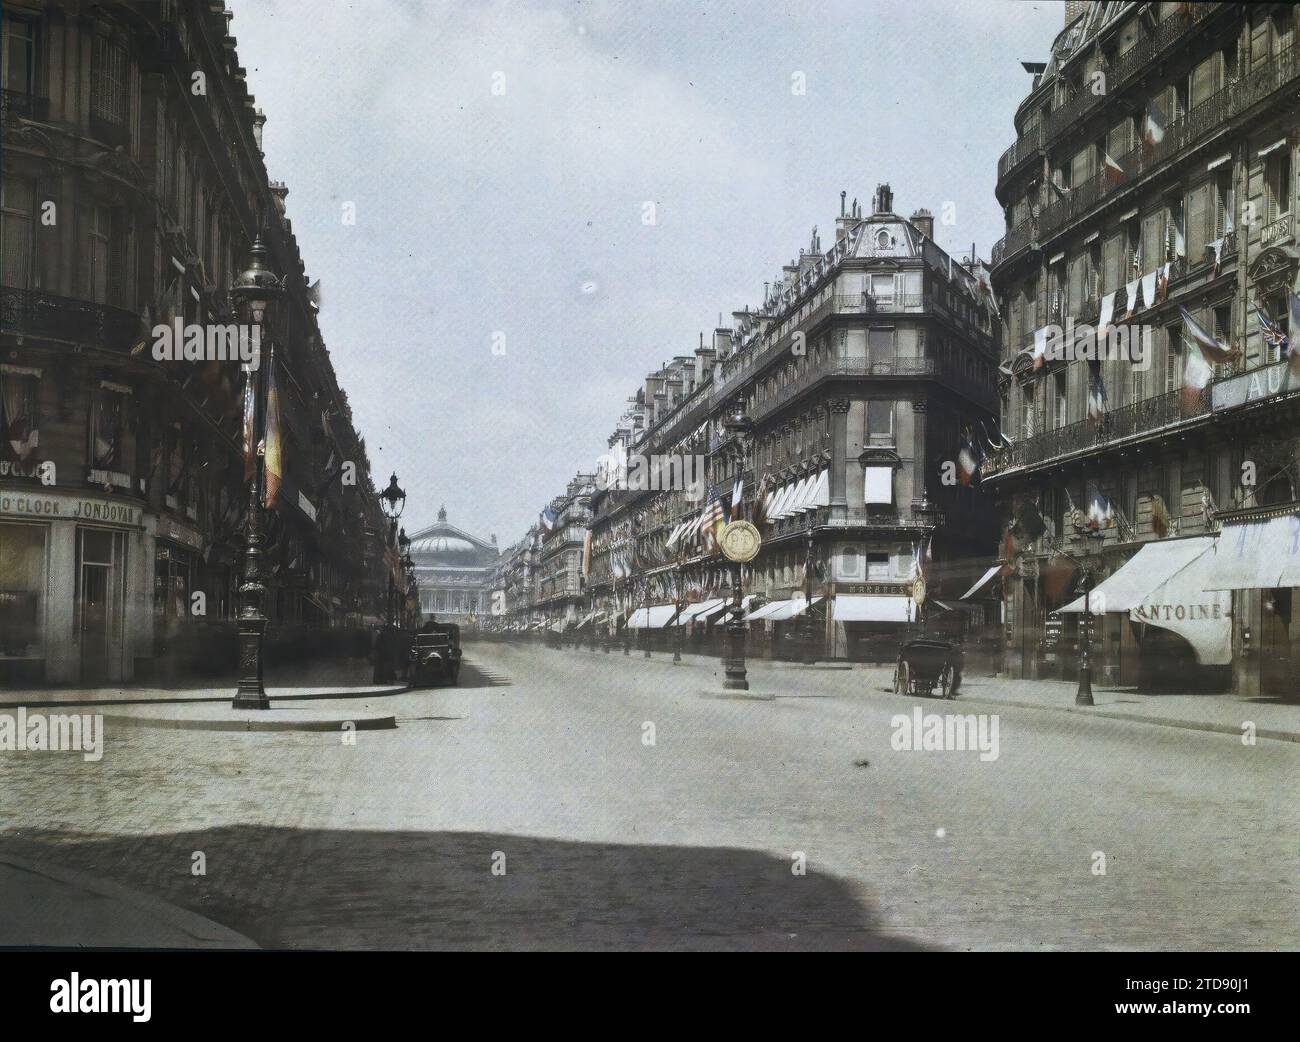 Paris (1st-2nd-9th arr.), France Avenue de l'Opéra the day after the Victory celebrations of July 13 and 14, 1919, Festival, Transport, First World War, Street lamp, street lamp, Political festival, Automobile transport, Car, Commemoration, Post-war, Flag, Opera, France, Paris, Avenue de l'Opéra, Paris, 17/07/1919 - 17/07/1919, Cuville, Fernand, Autochrome, photo, Glass, Autochrome, photo, Positive, Horizontal, Size 9 x 12 cm Stock Photo